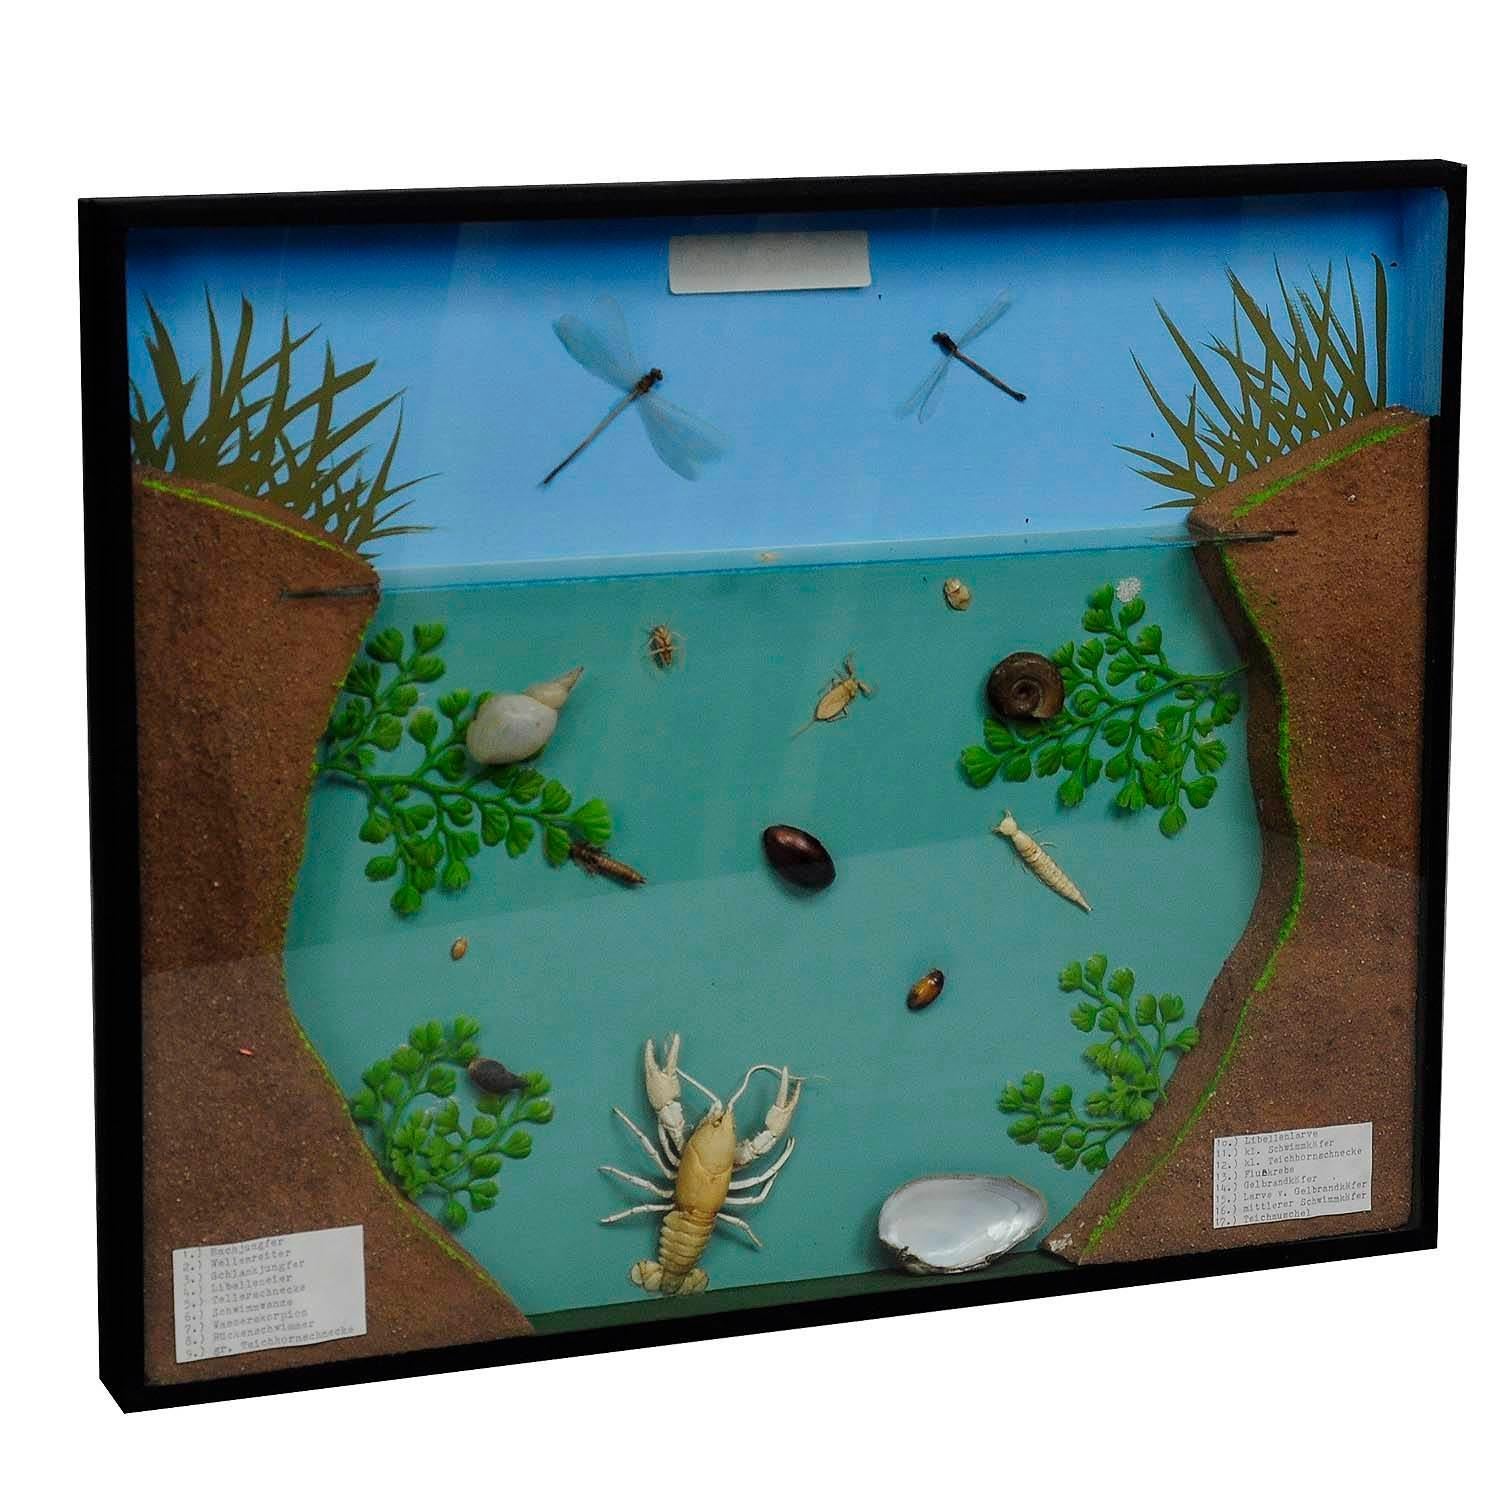 Great Vintage School Teaching Display of the Fresh Water Habitat

A vintage school teaching showcase with specimen illustrating the fresh water habitat. Used as teaching material in German schools ca. 1960.

artfour is an owner-managed trading